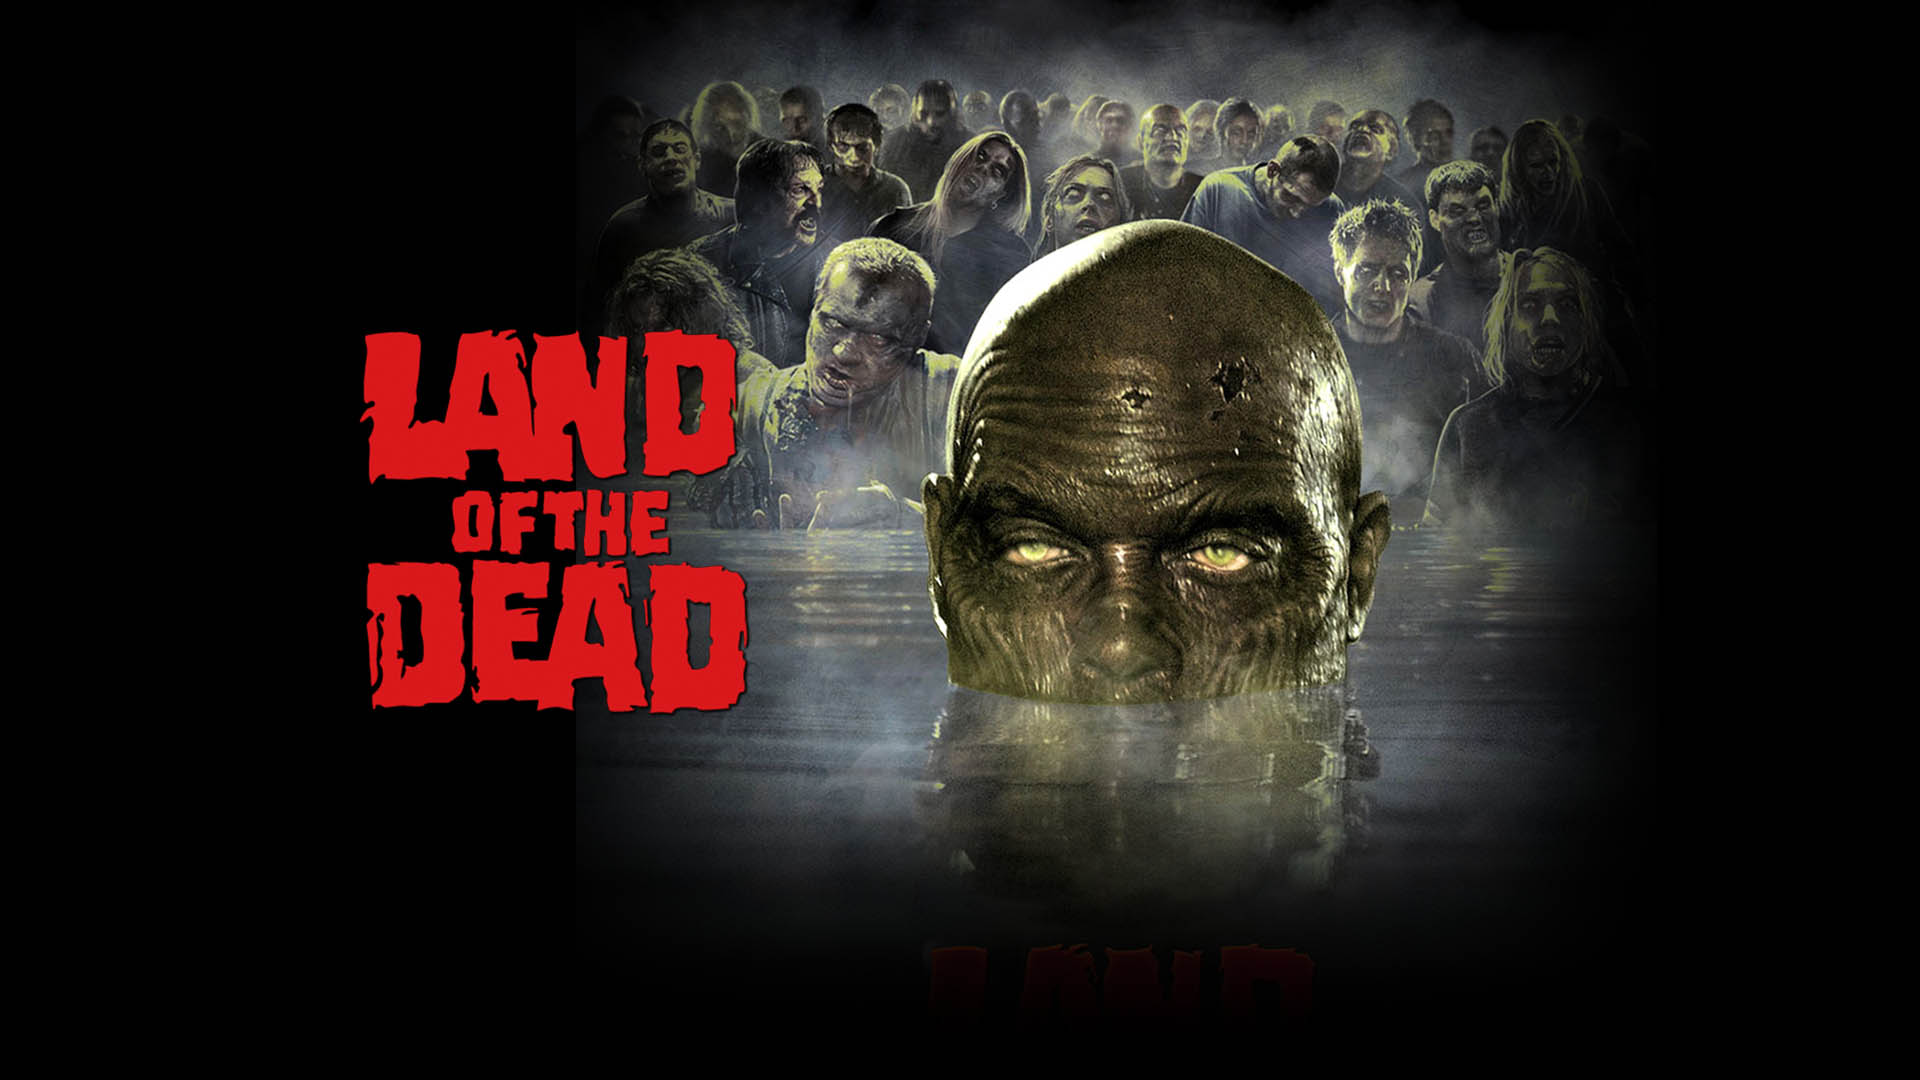 Watch Land of the Dead Online | Stream Full Movies